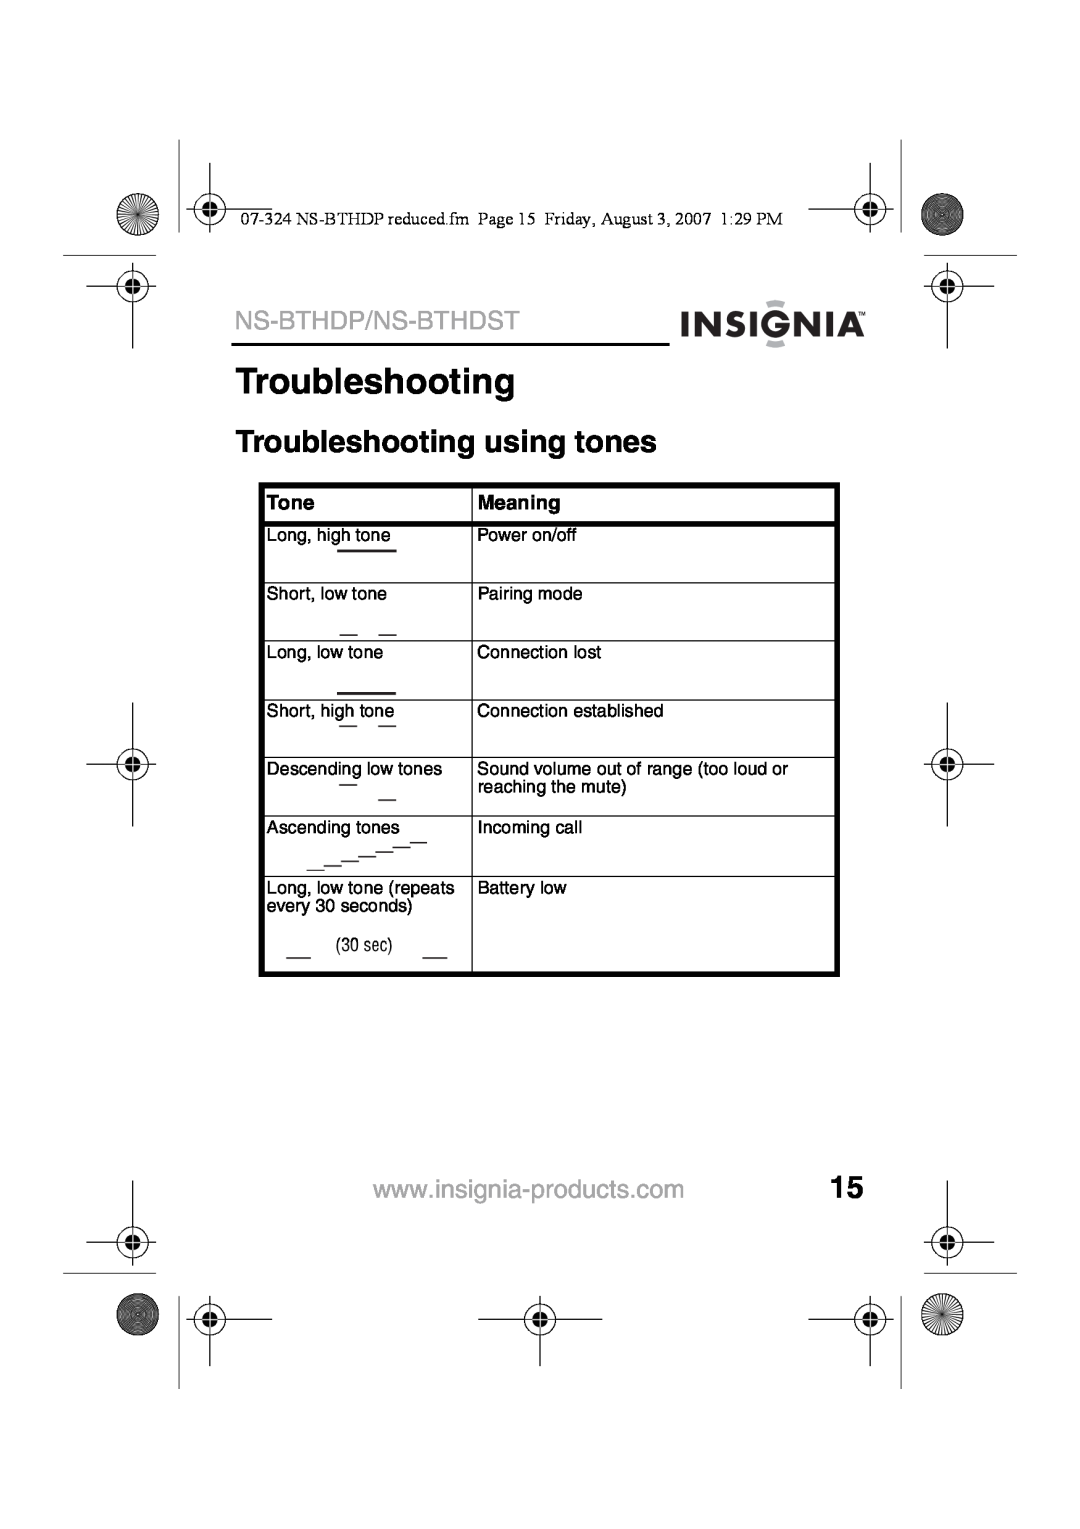 Insignia NS-BTHDST manual Troubleshooting using tones, Ns-Bthdp/Ns-Bthdst, Tone, Meaning 